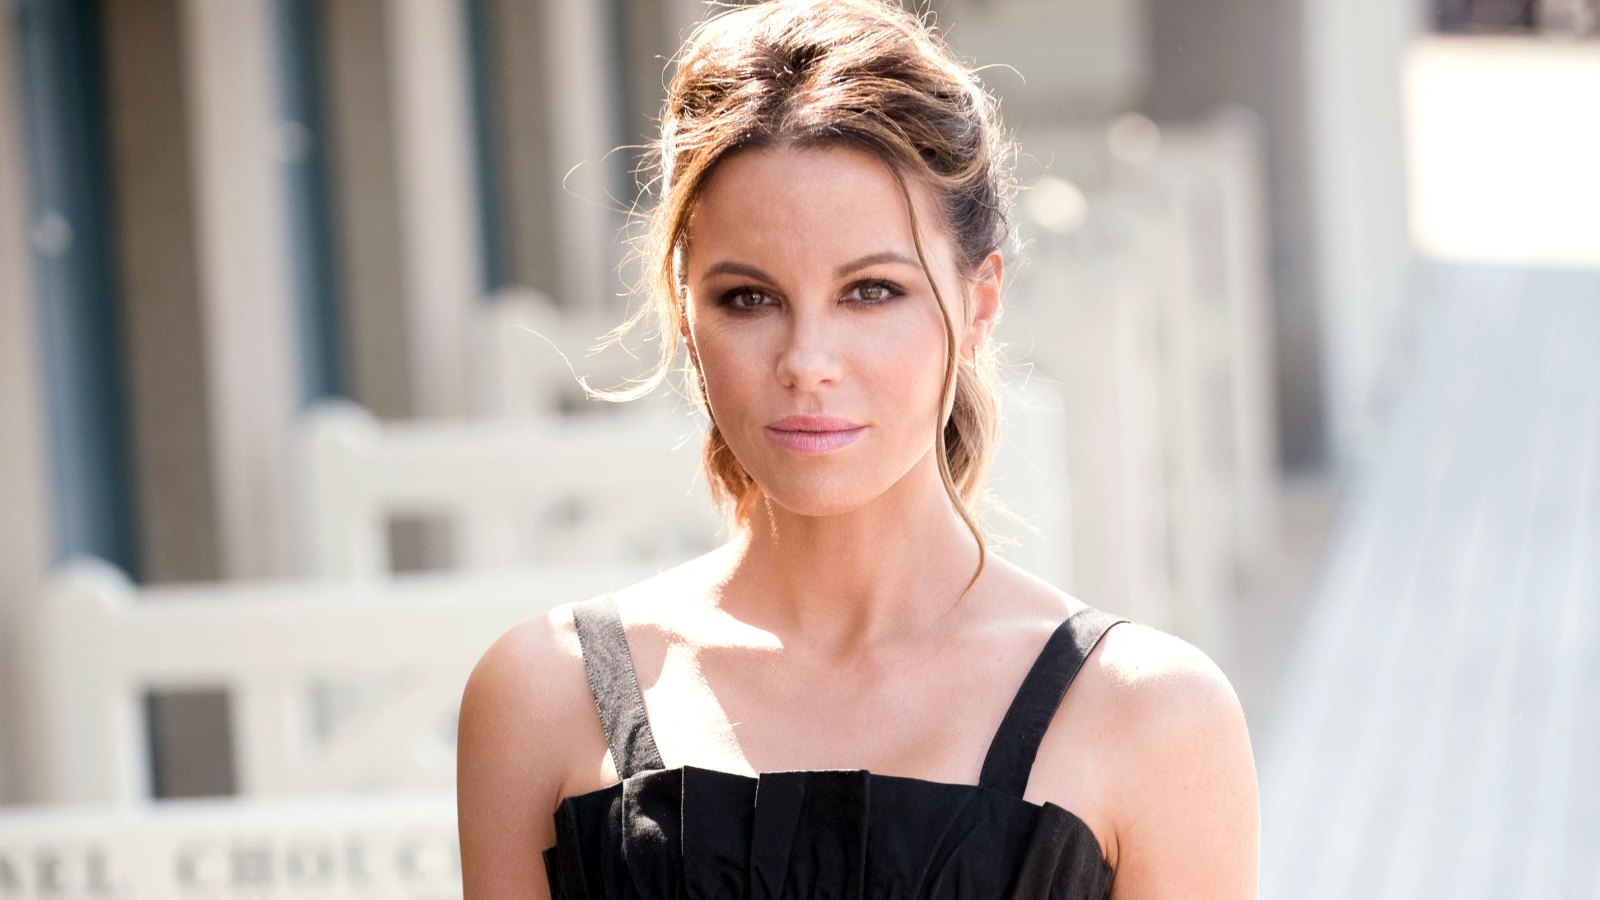 Kate Beckinsale Reveals She's Been Hospitalized After Suffering Ruptured Ovarian Cysts